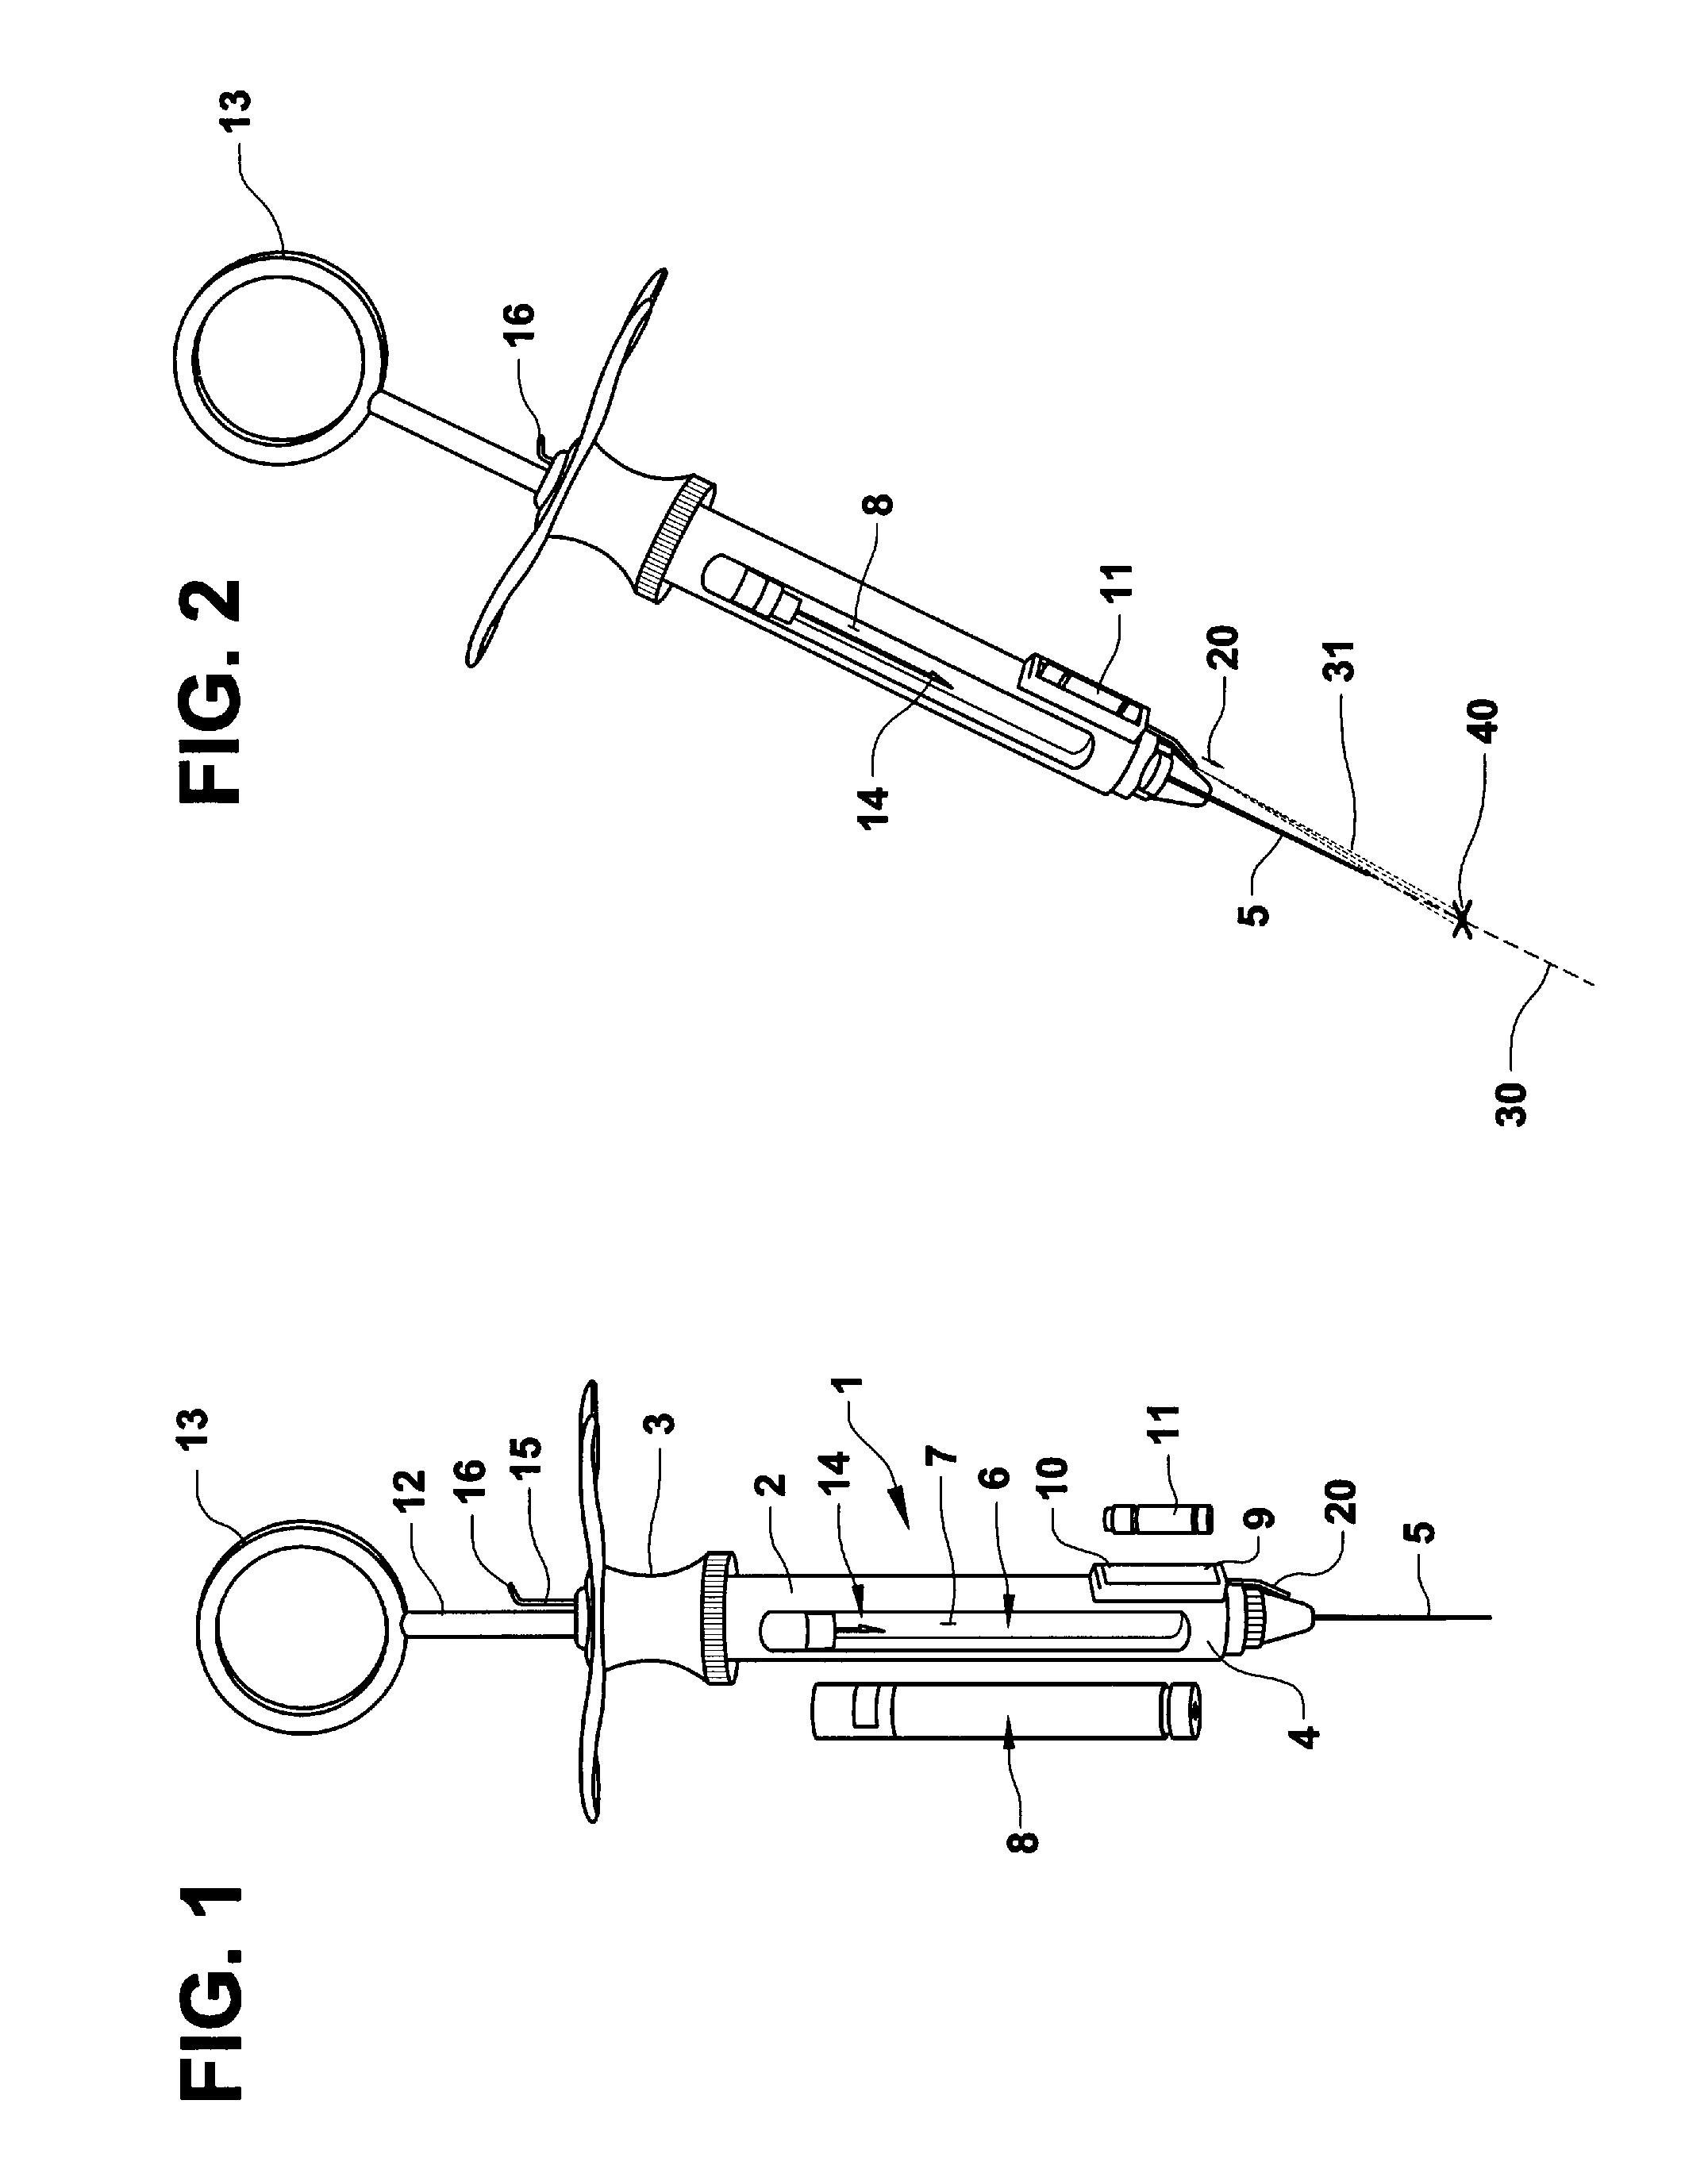 Method and apparatus for applying an anesthetic and bactericide